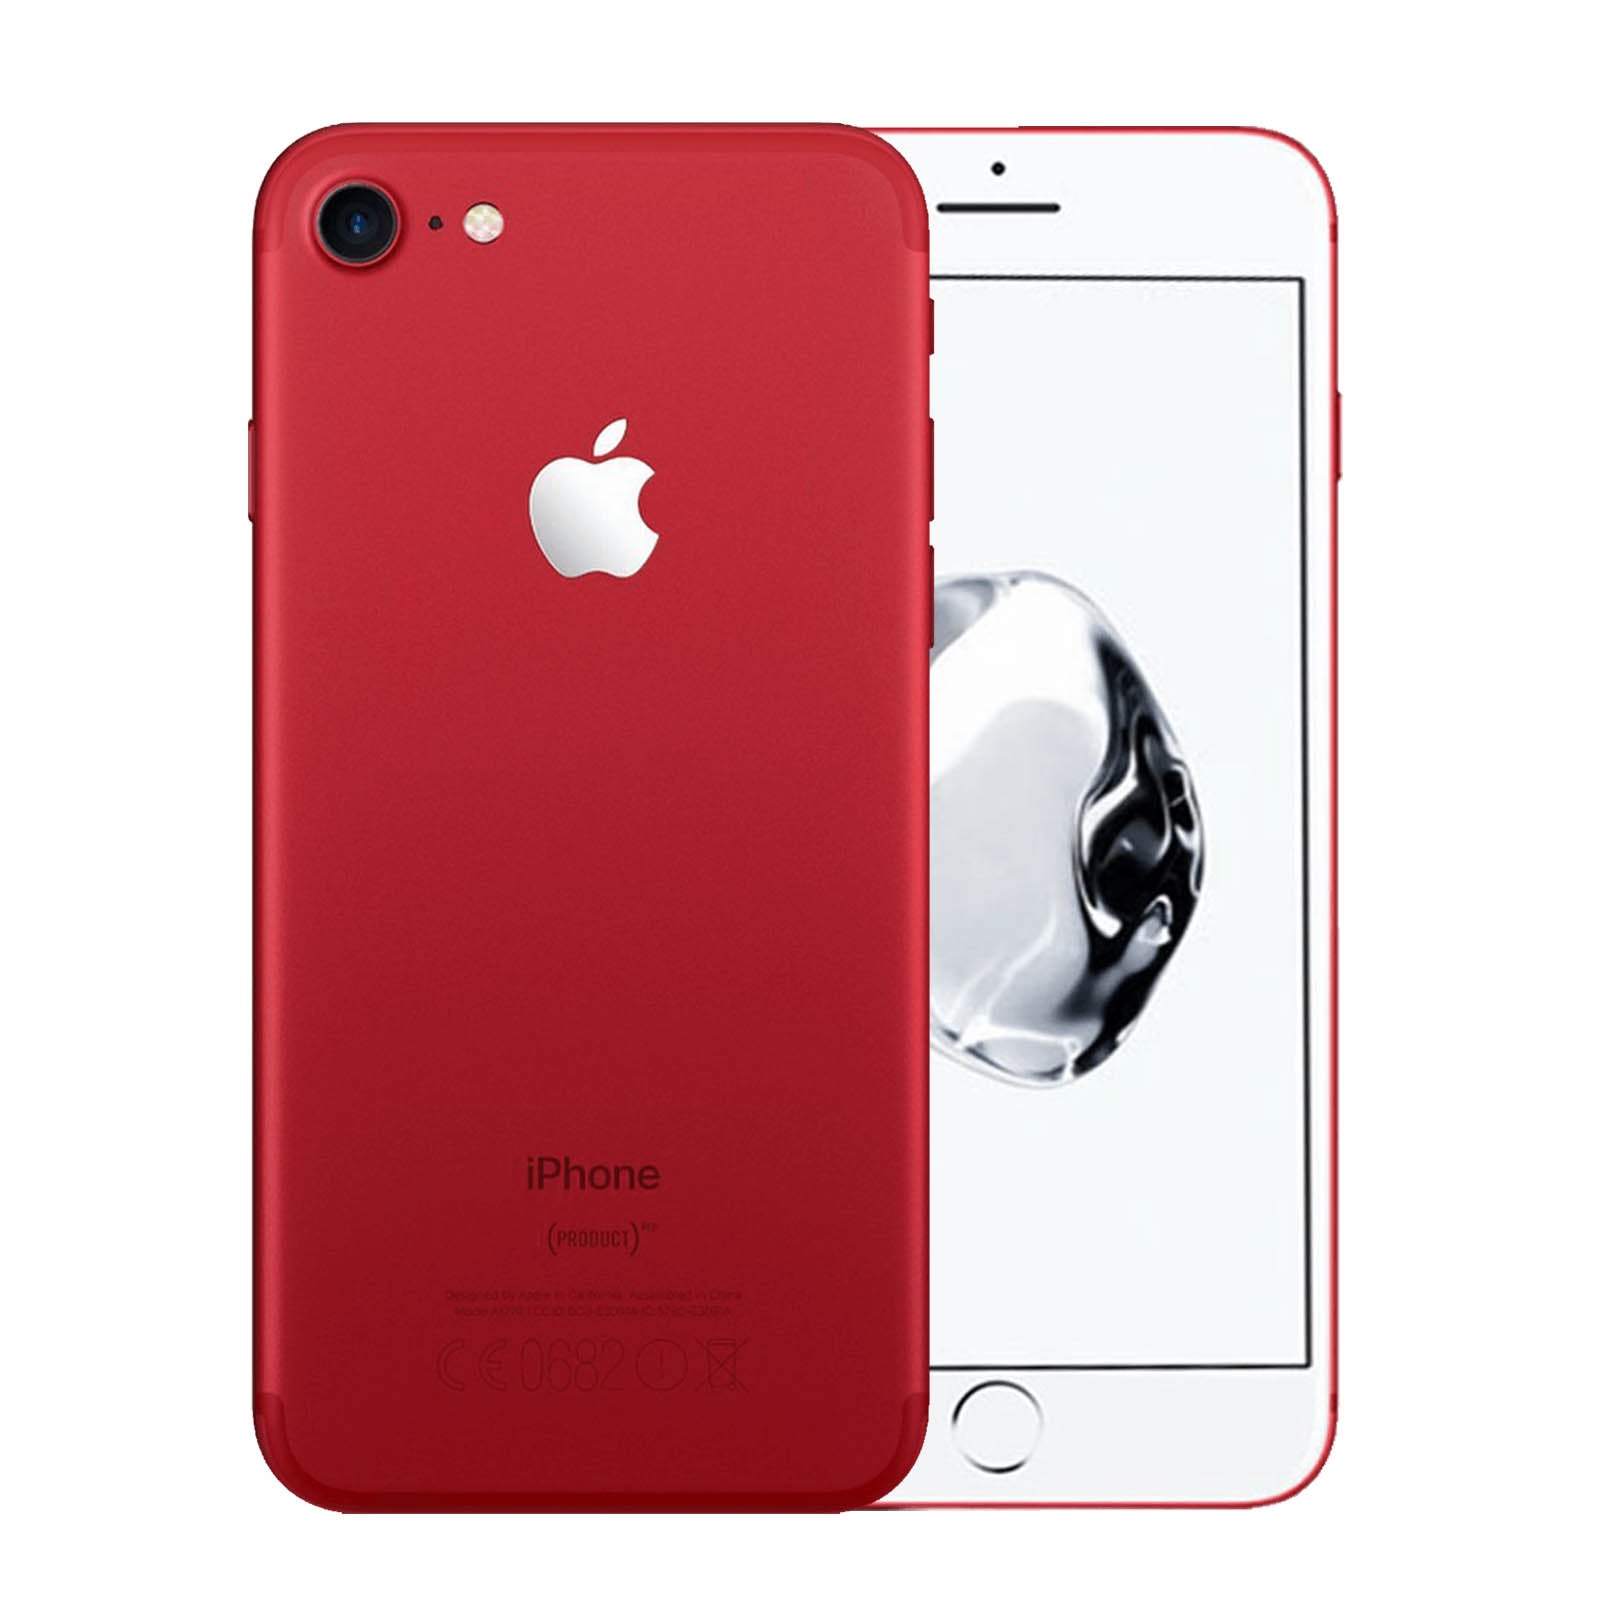 Apple iPhone 7 128GB Product Product Red Makellos - Ohne Vertrag